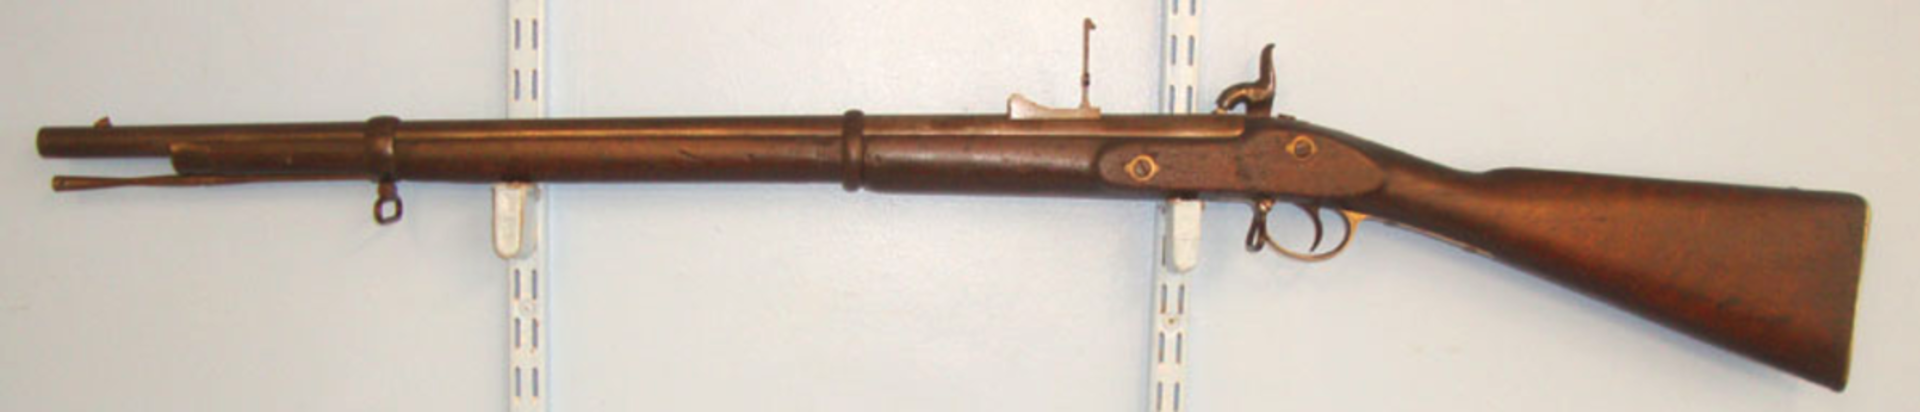 VERY RARE, One Of 16,000 British Crimean War Era 1856 Enfield .577” Cal, Percussion Rifled Musket - Image 2 of 3